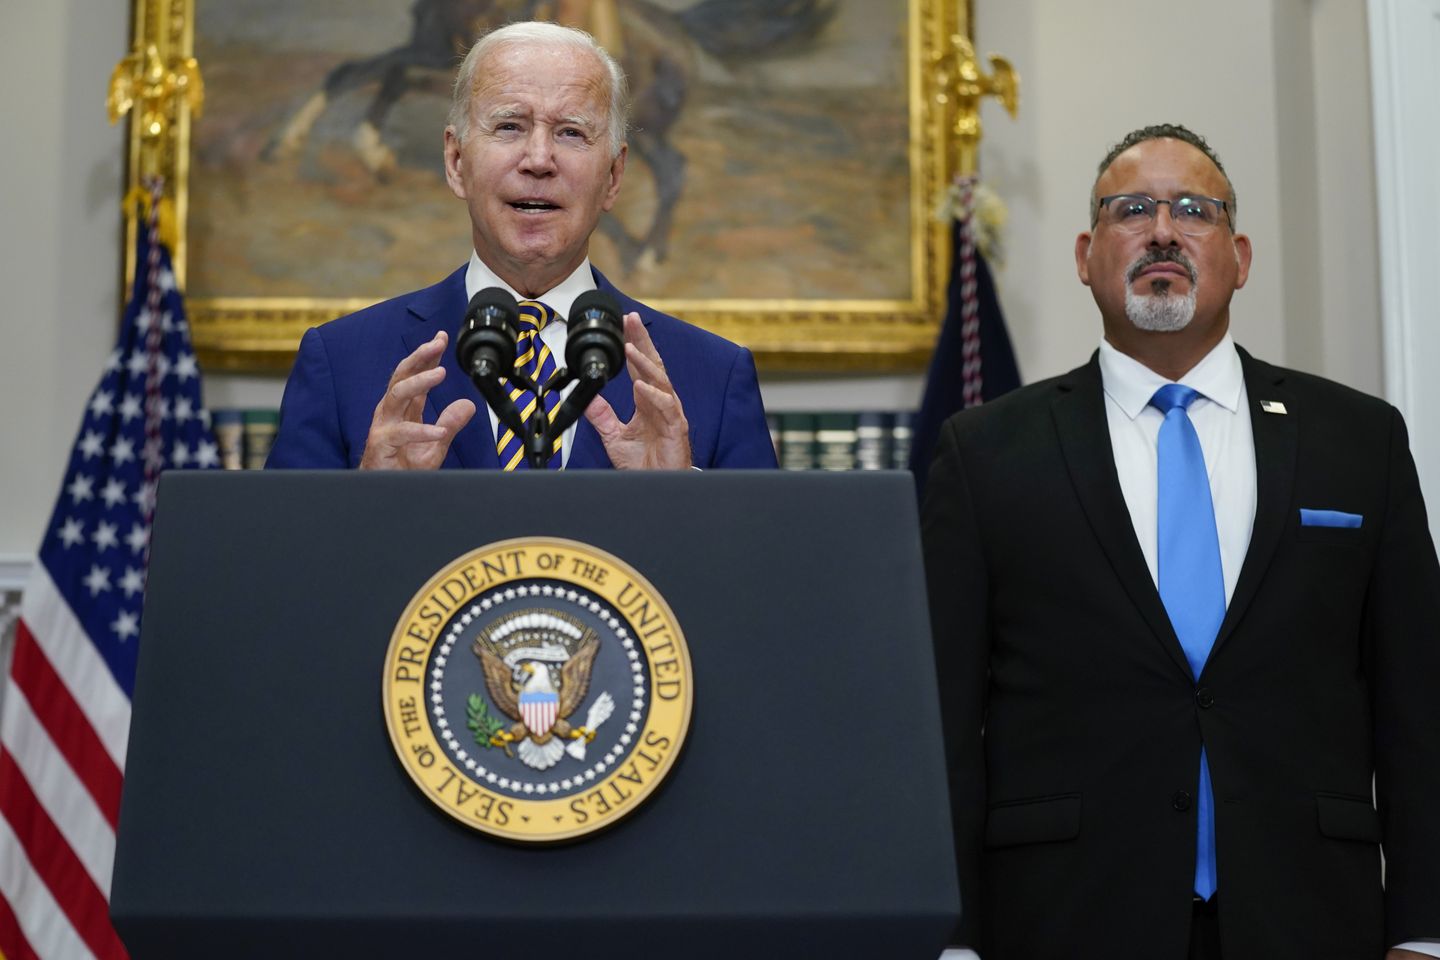 Shaky start for Biden's college debt relief, loan servicers in the dark about the plan